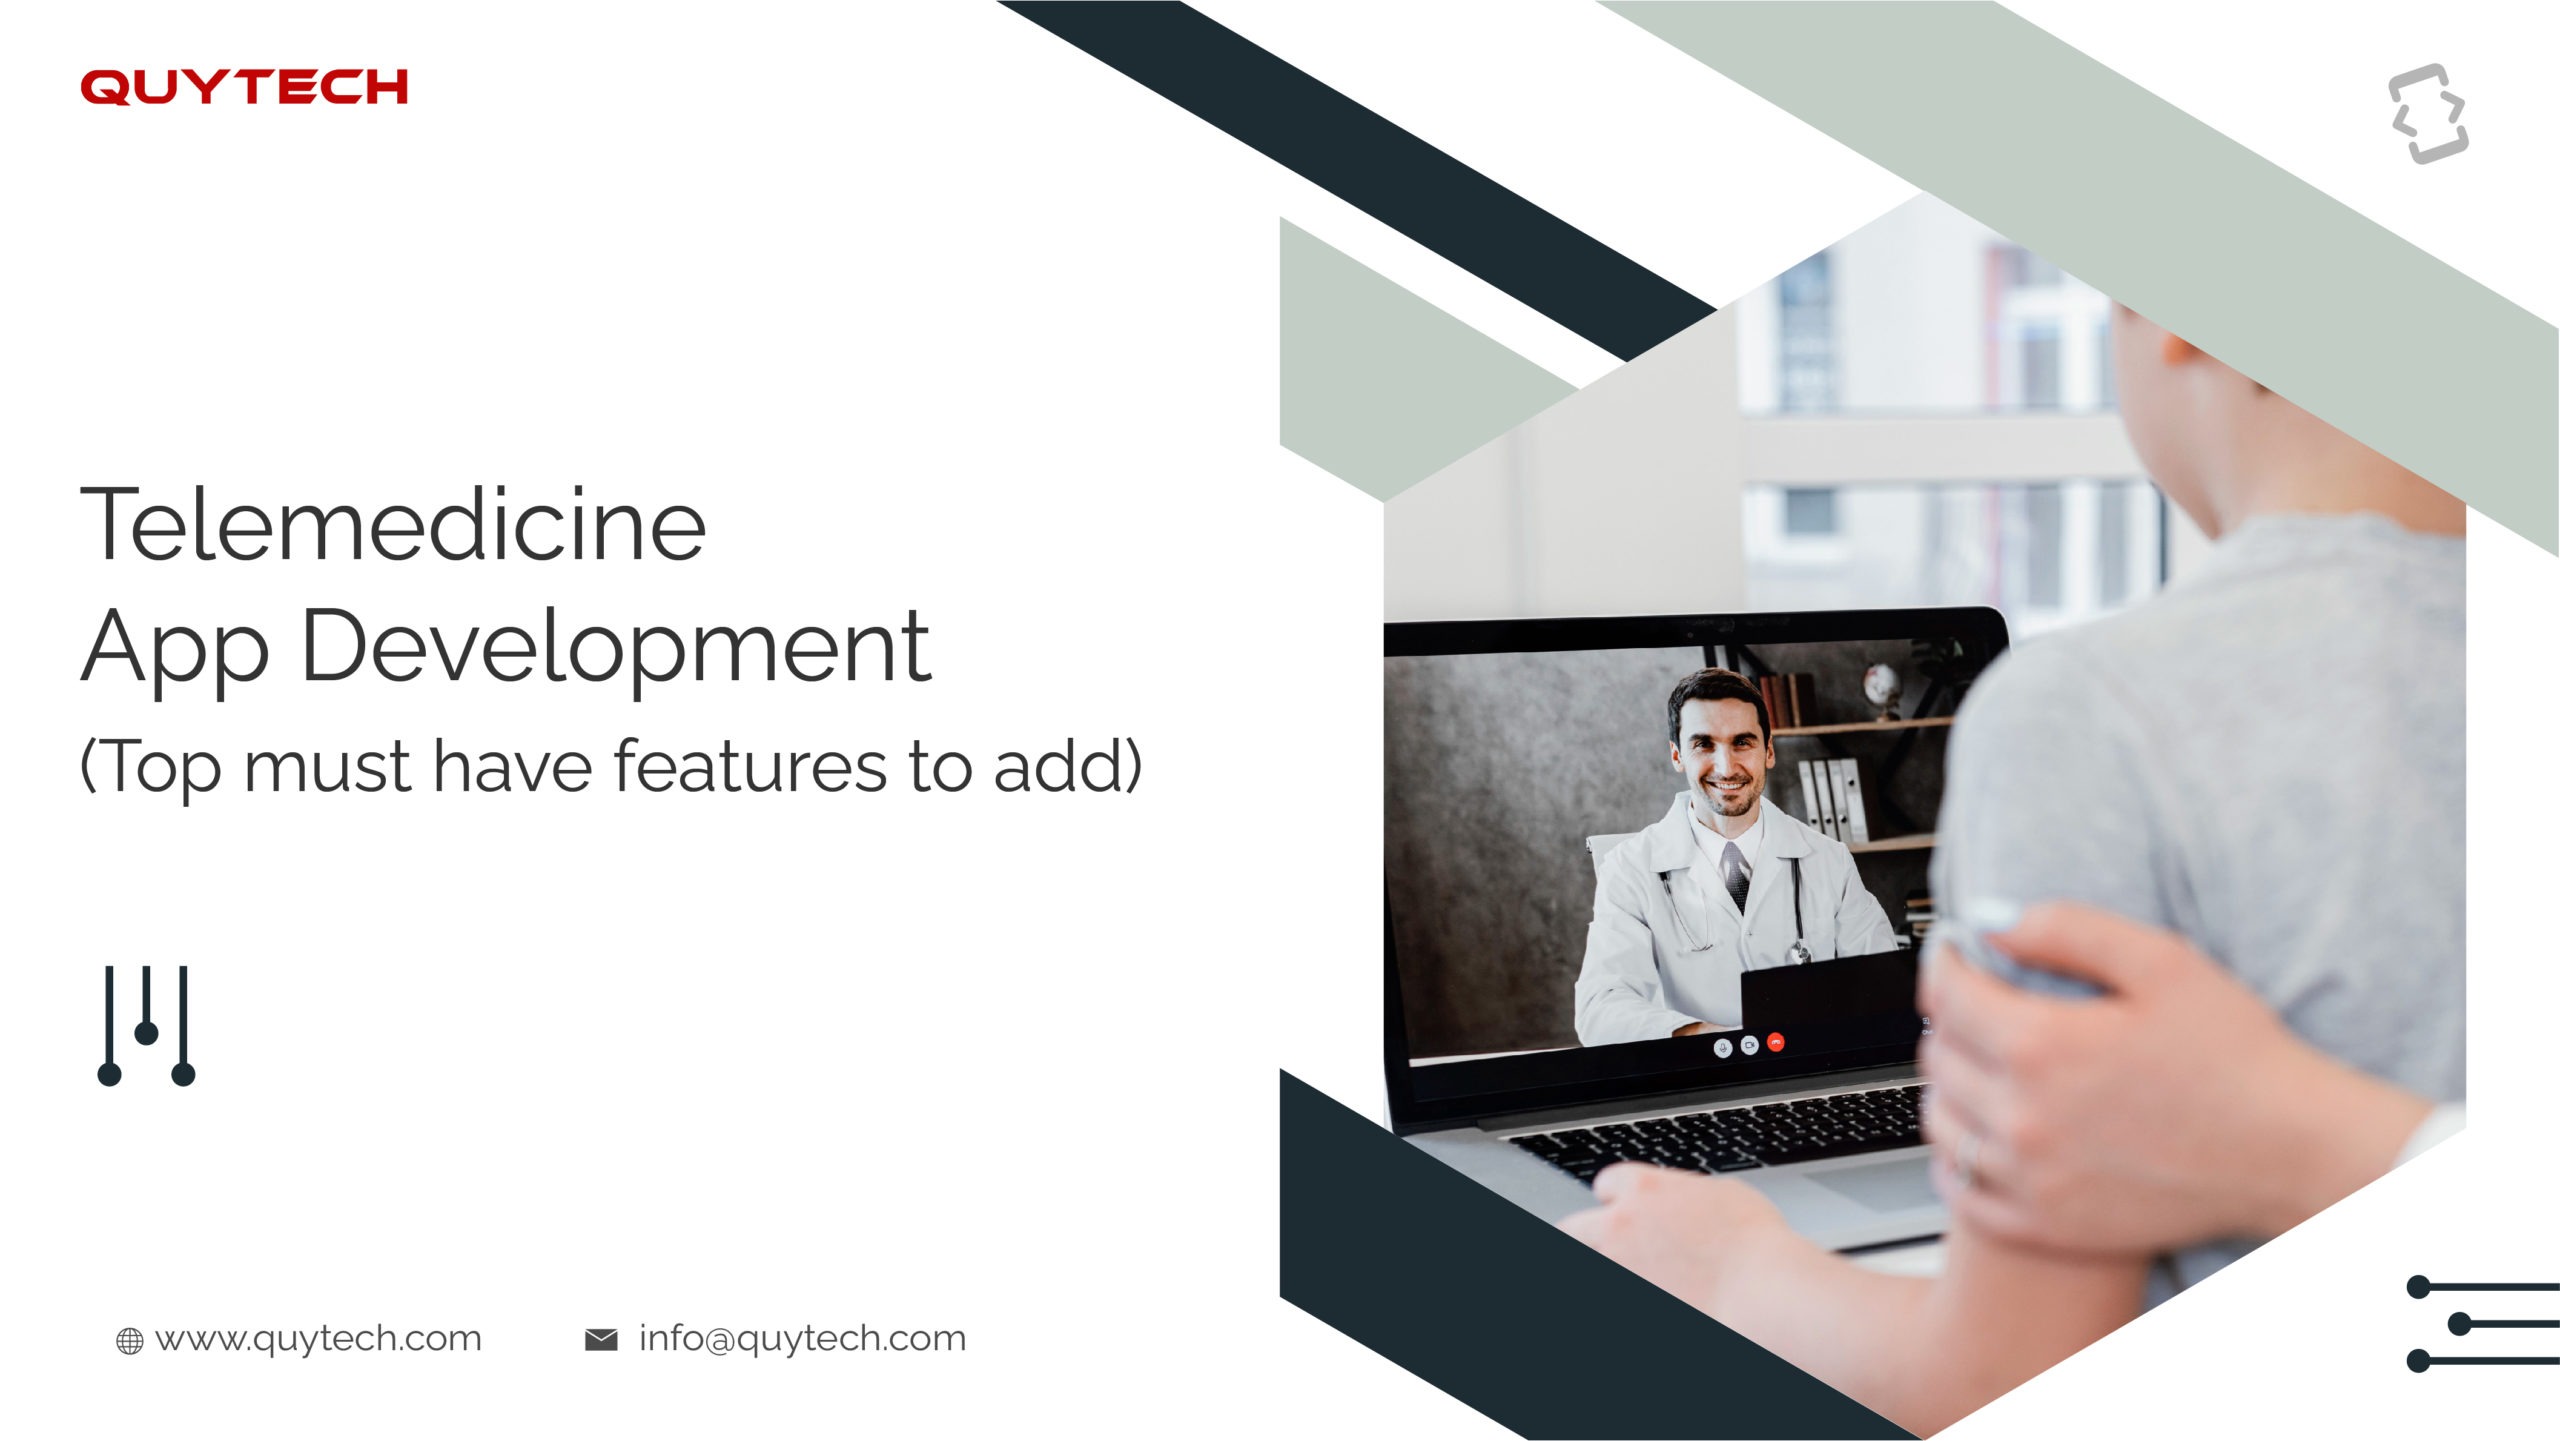 What Features Would Be Prominent for Telemedicine App Development?